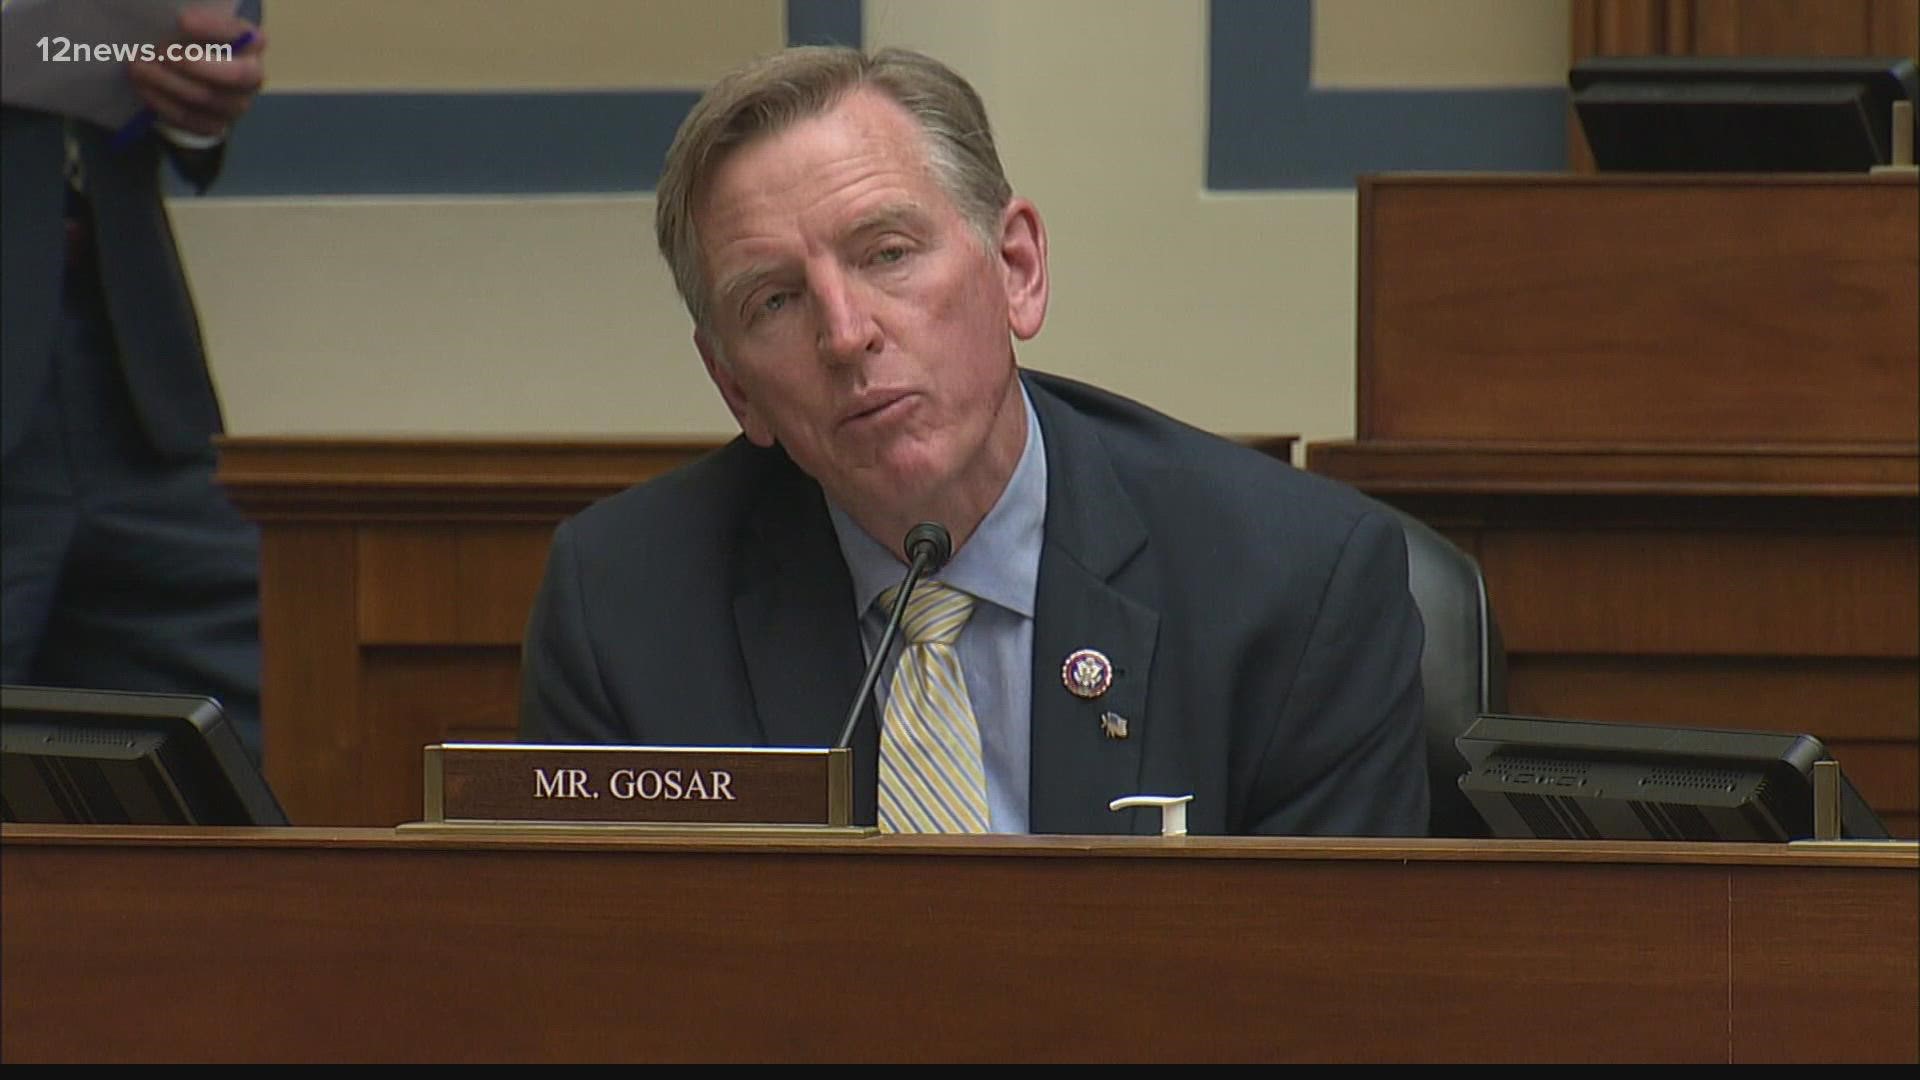 The House of Representatives is expected to vote on censuring Congressman Paul Gosar after he tweeted a video appearing to show him killing a member of Congress.